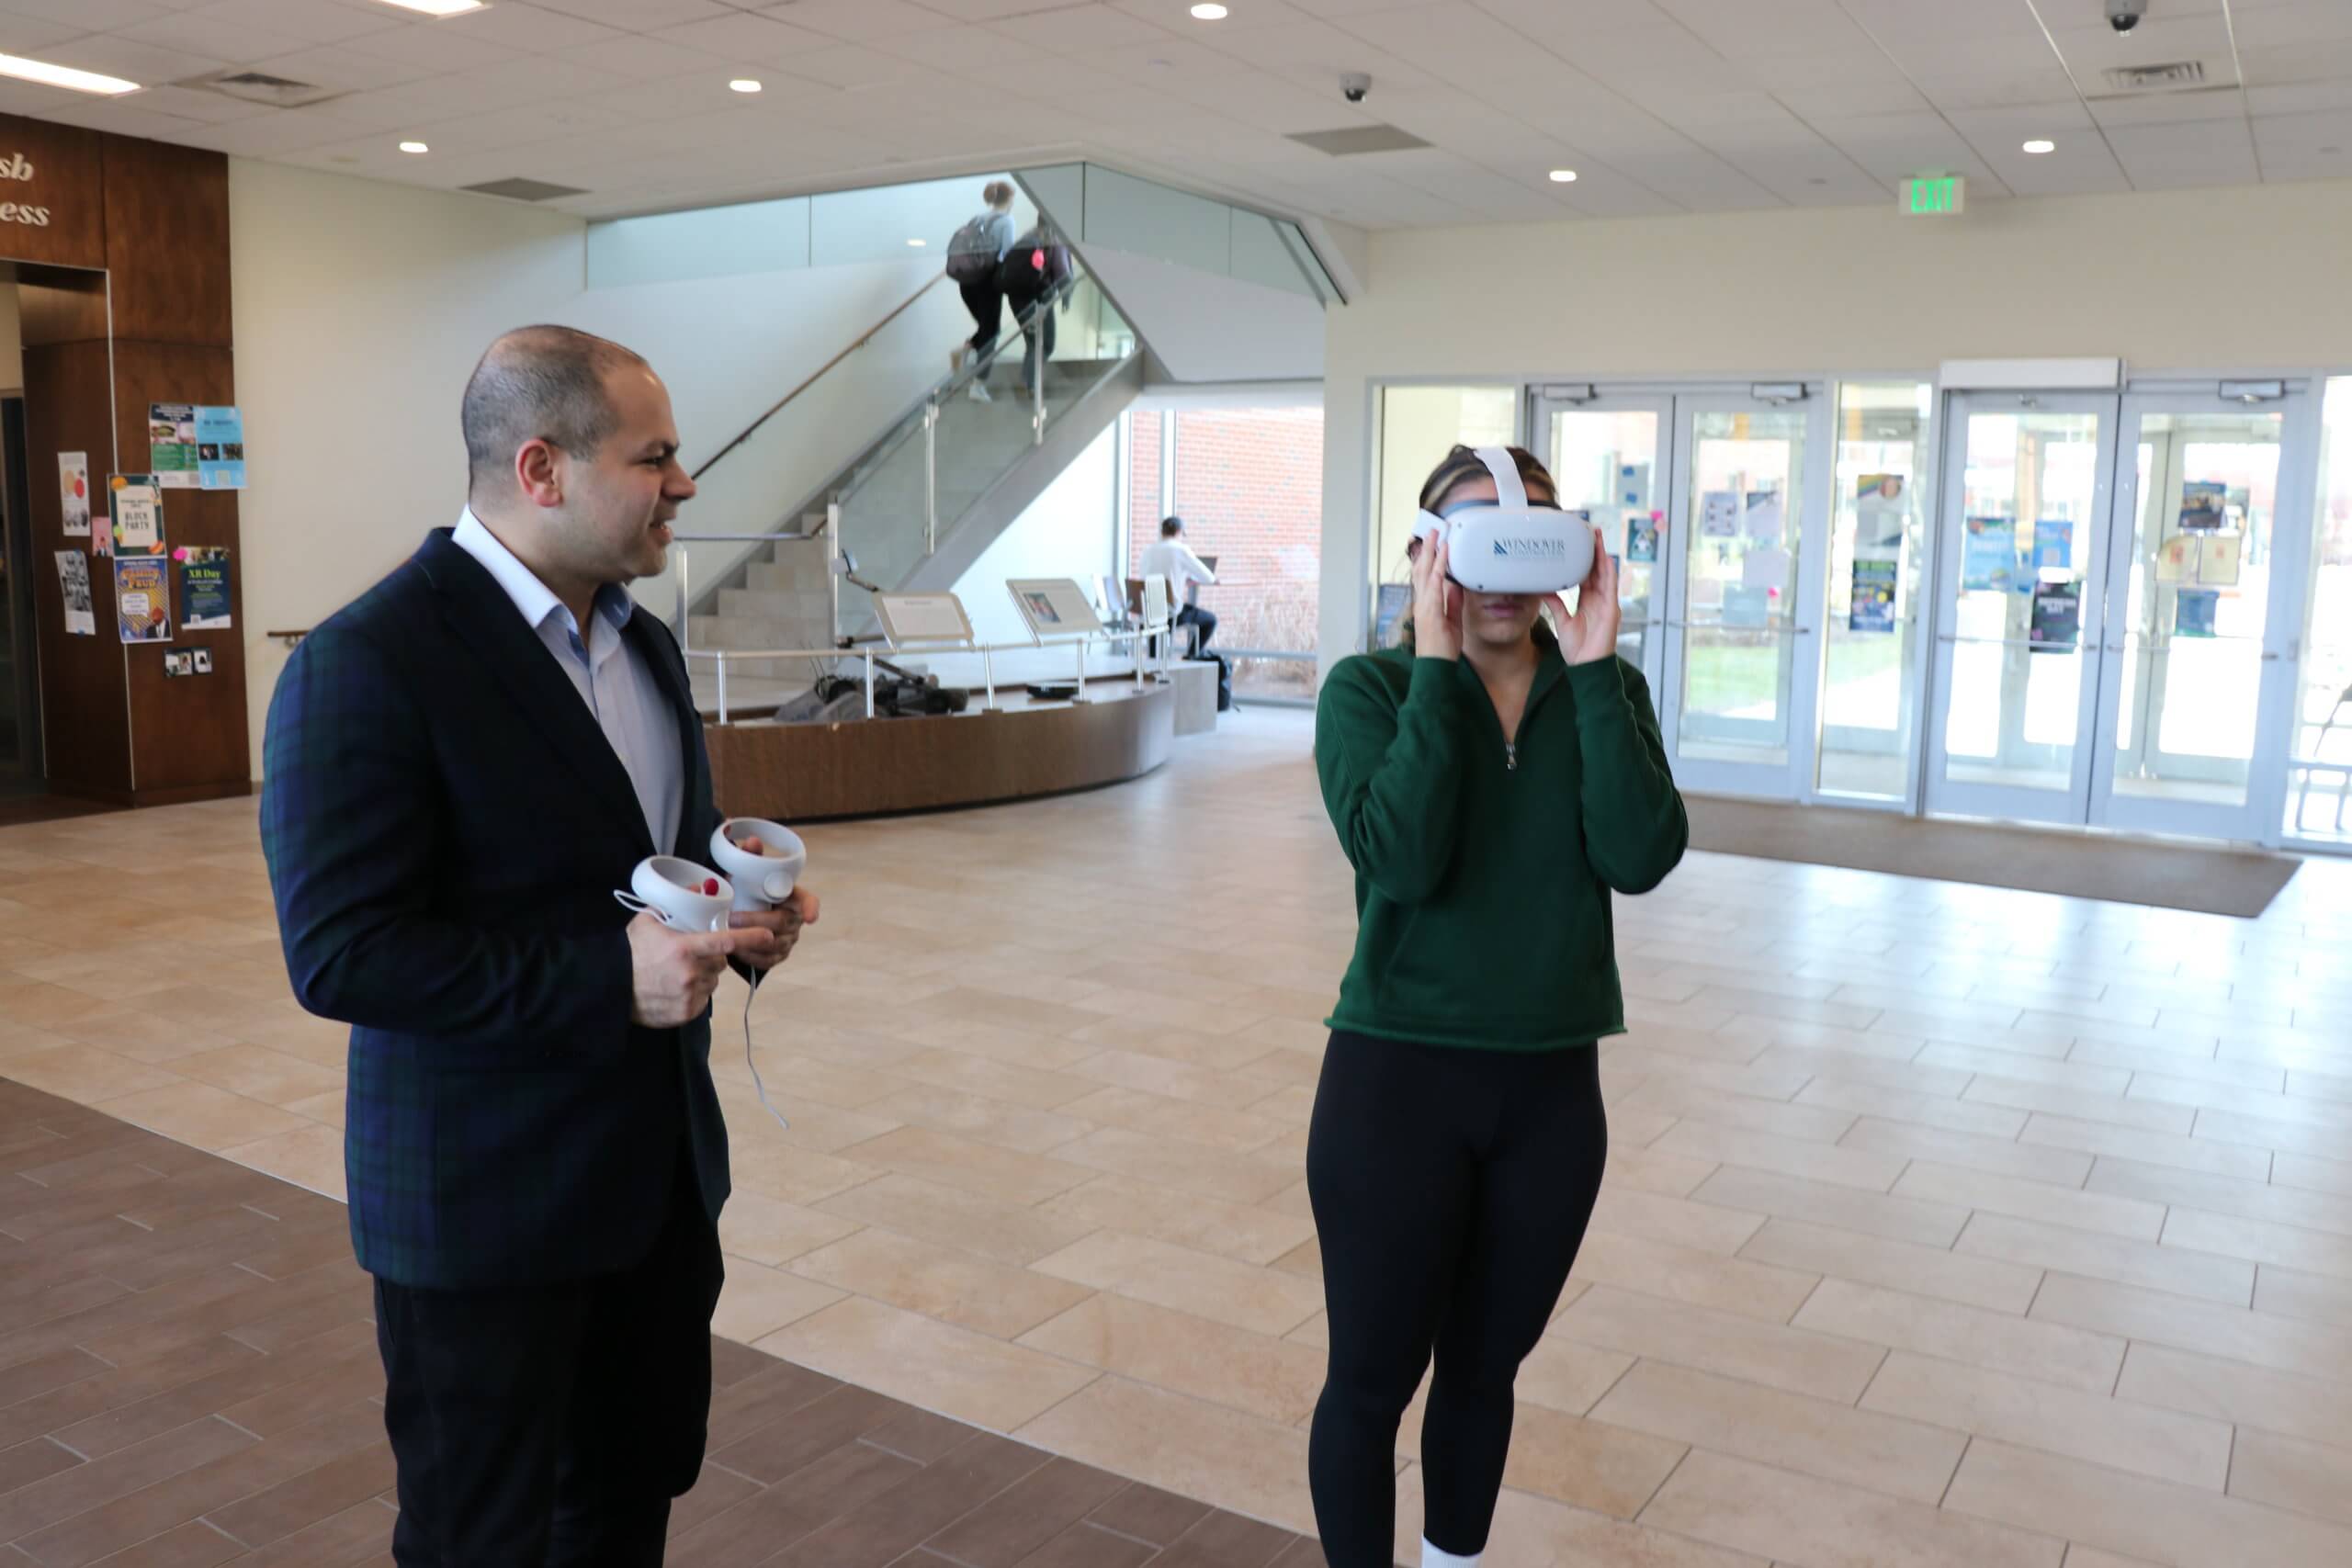 Two people using virtual reality